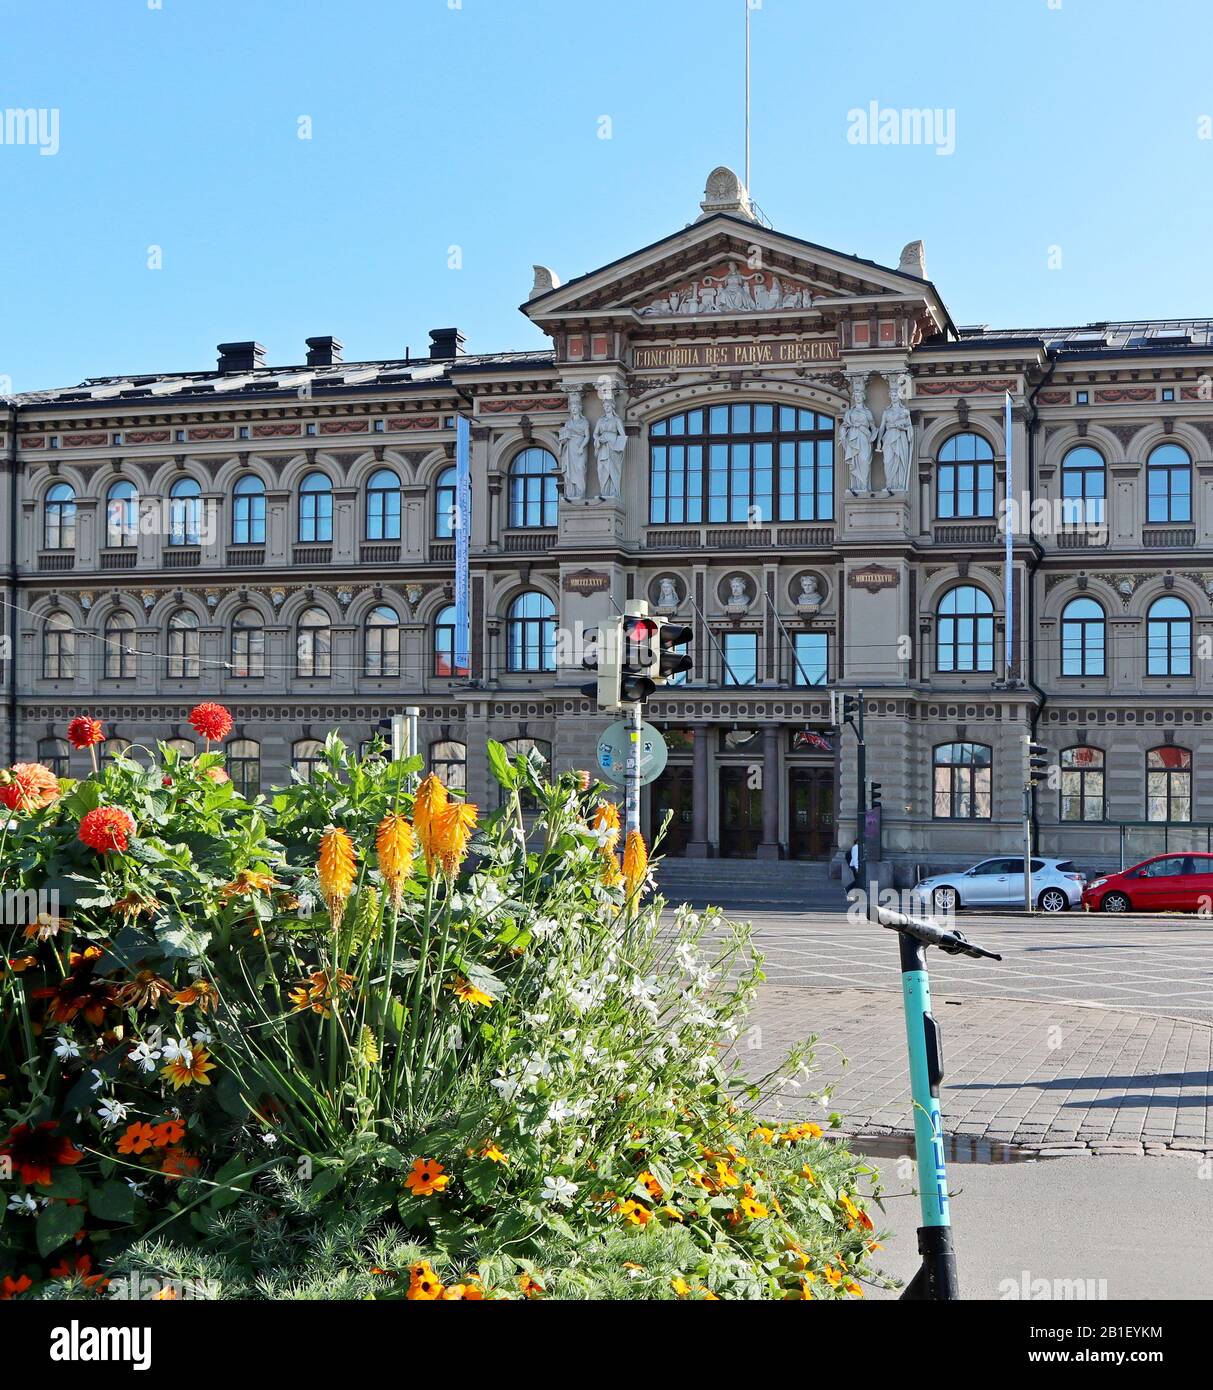 Helsinki historical building and flowers summer city streets famous places city center Stock Photo